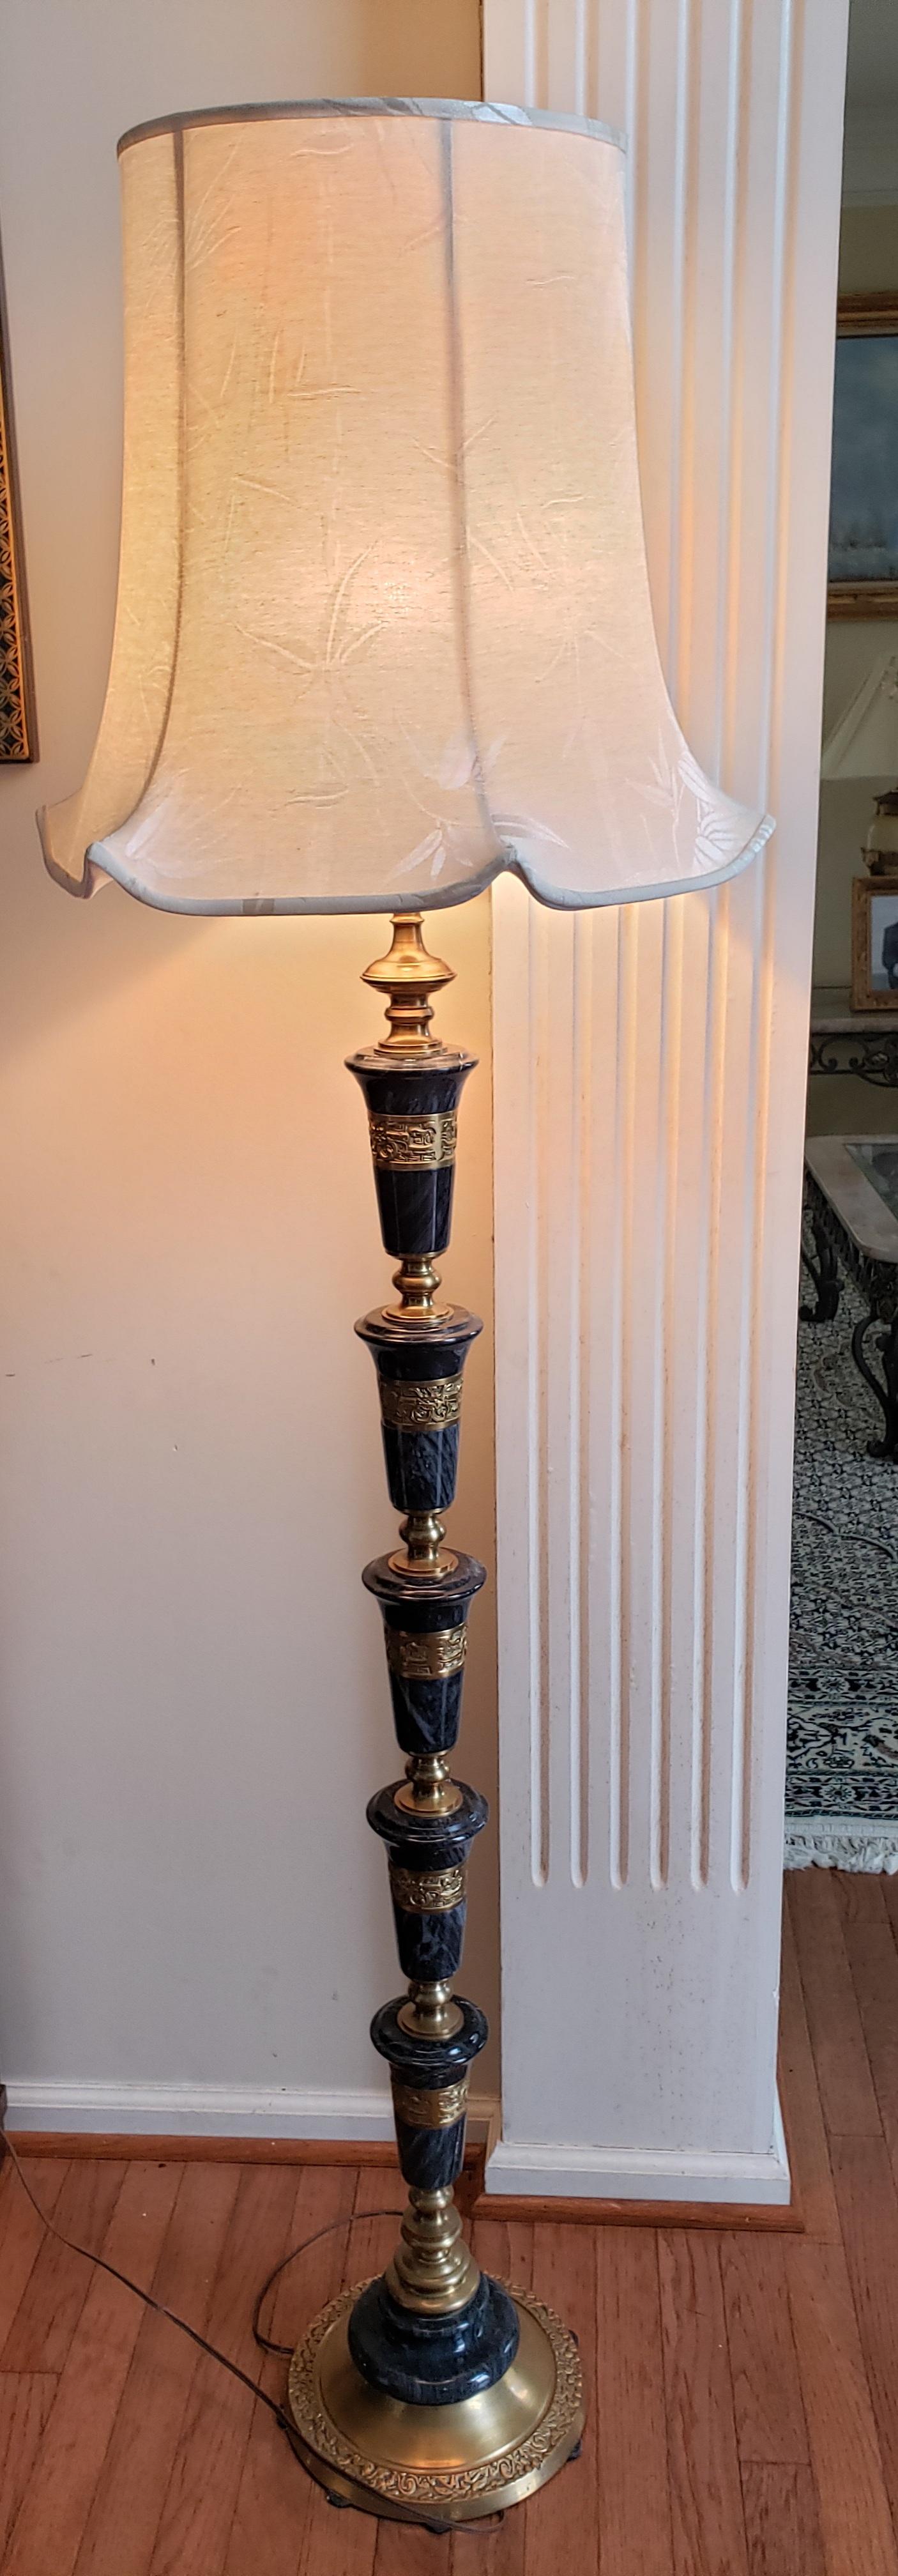 brass and marble floor lamp